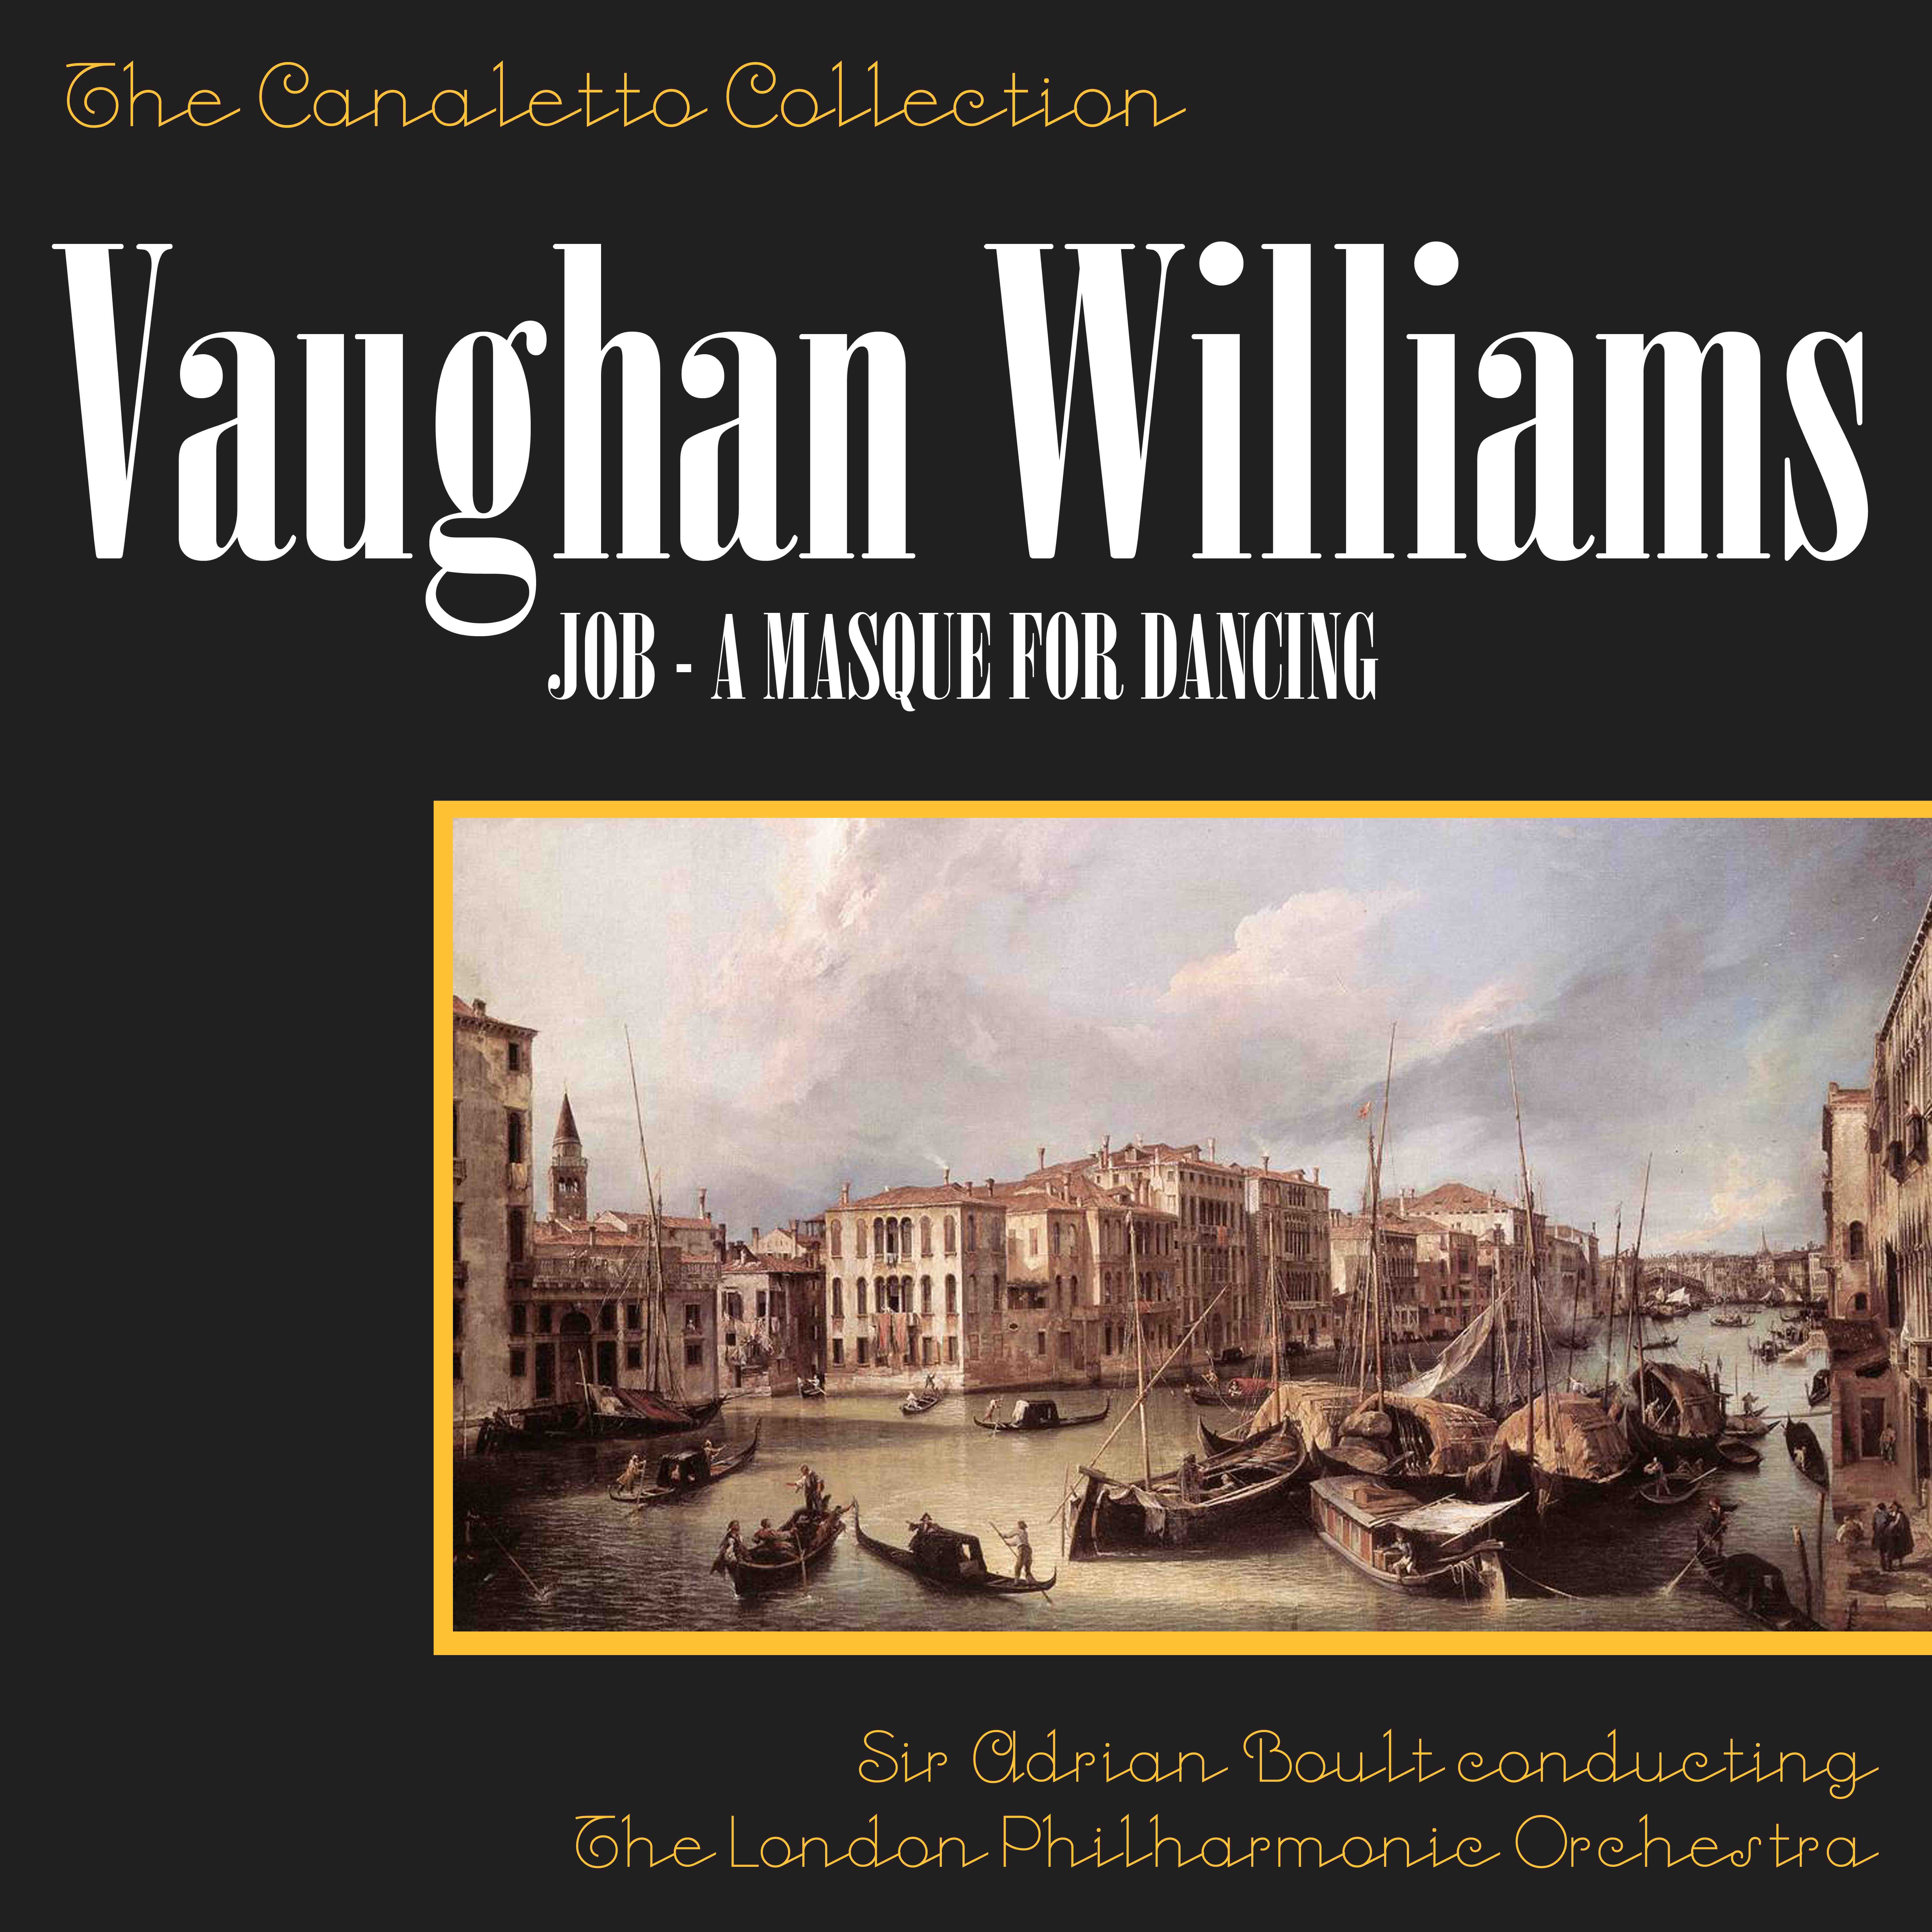 Vaughan Williams: Job - A Masque For Dancing: Scene VII - Elihu's Dance Of Youth And Beauty